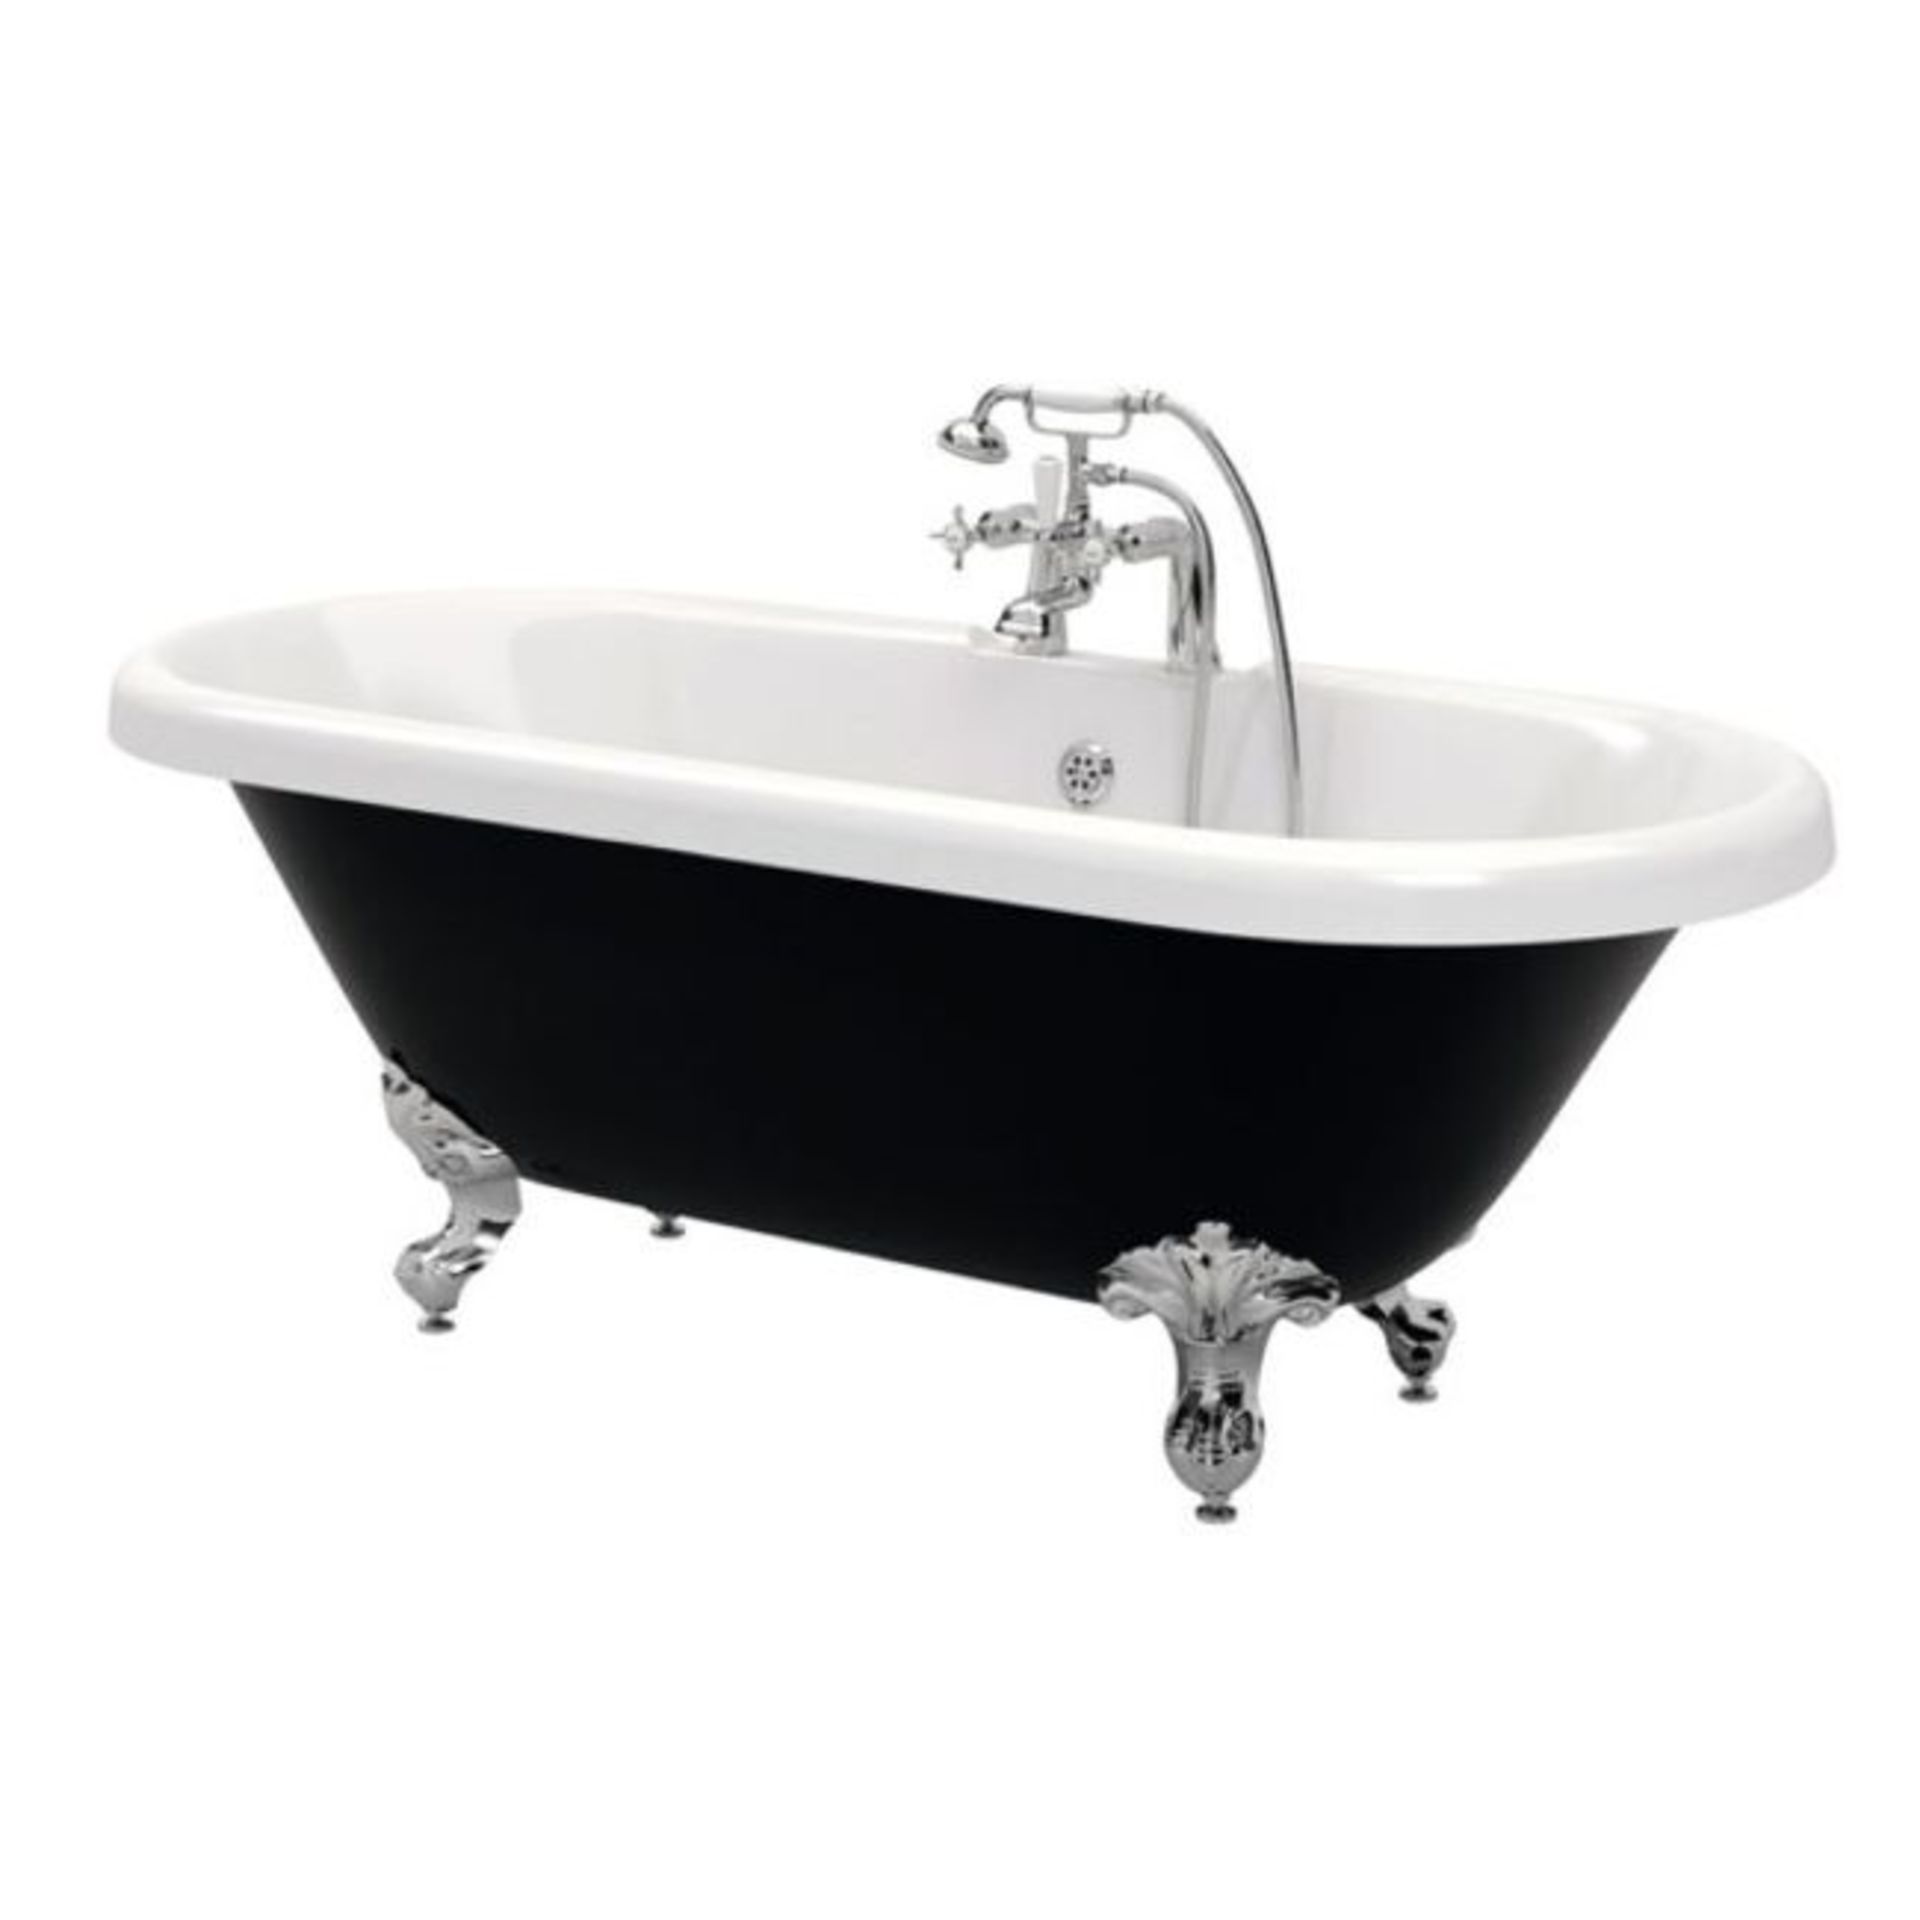 New 1690x740x620mm Richmond Black Roller Top Freestanding Bath. Rrp £1,549.With Chrome Ball F... - Image 2 of 2